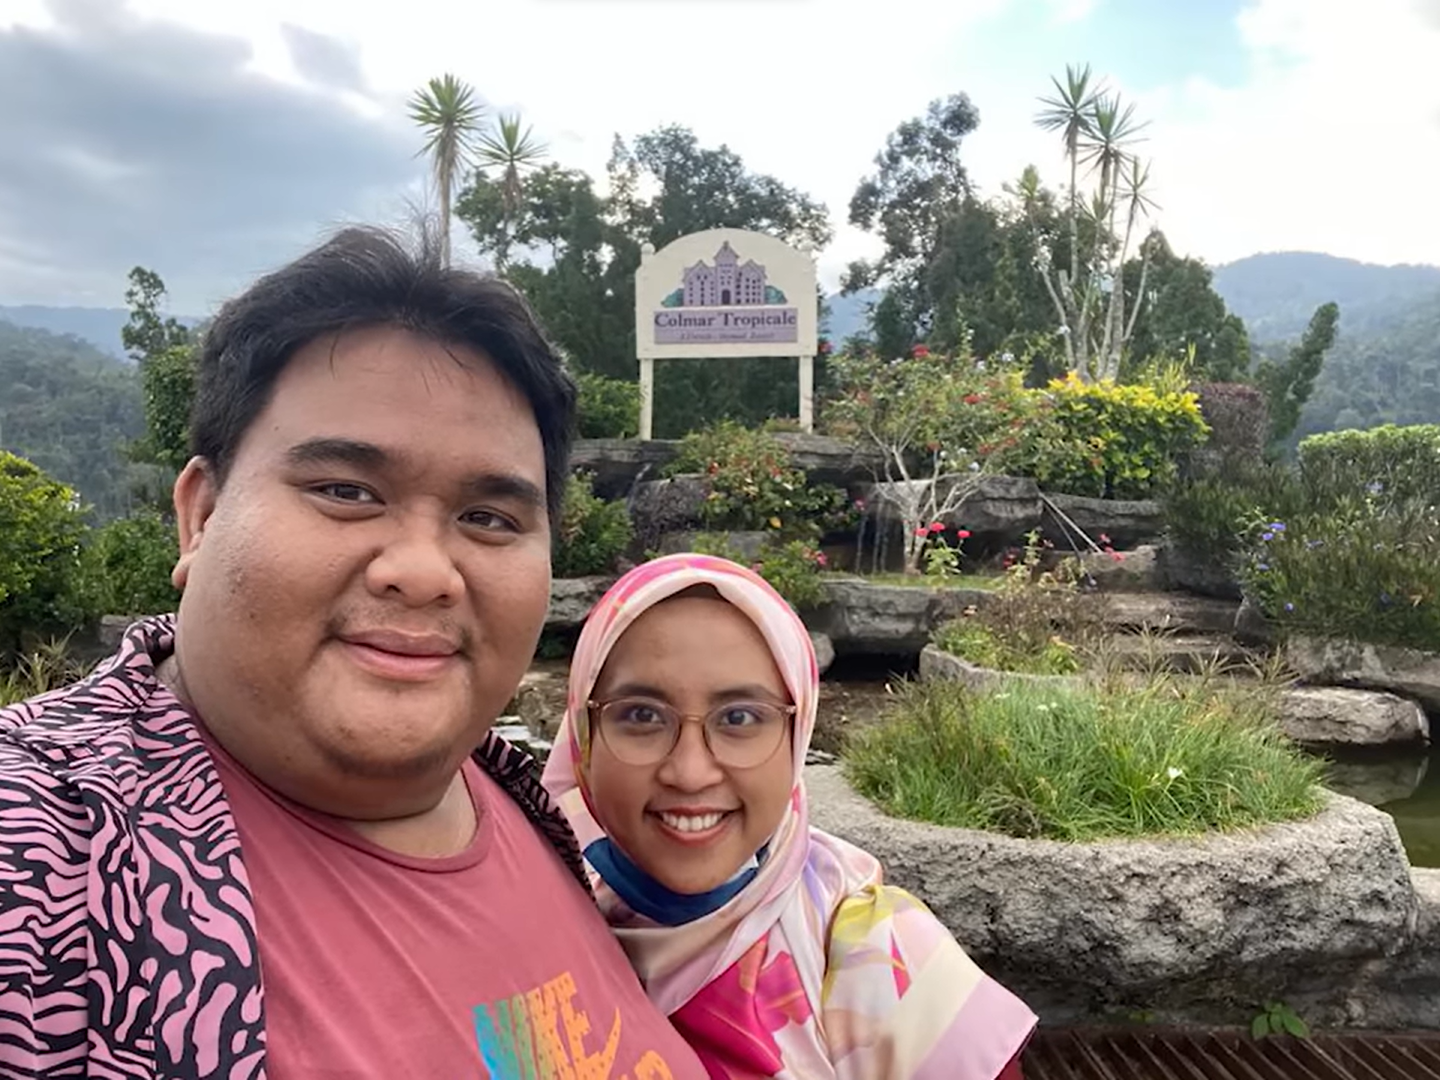 M'sian claims his wife was forced to be discharged at 4am as her medical card had insufficient funds